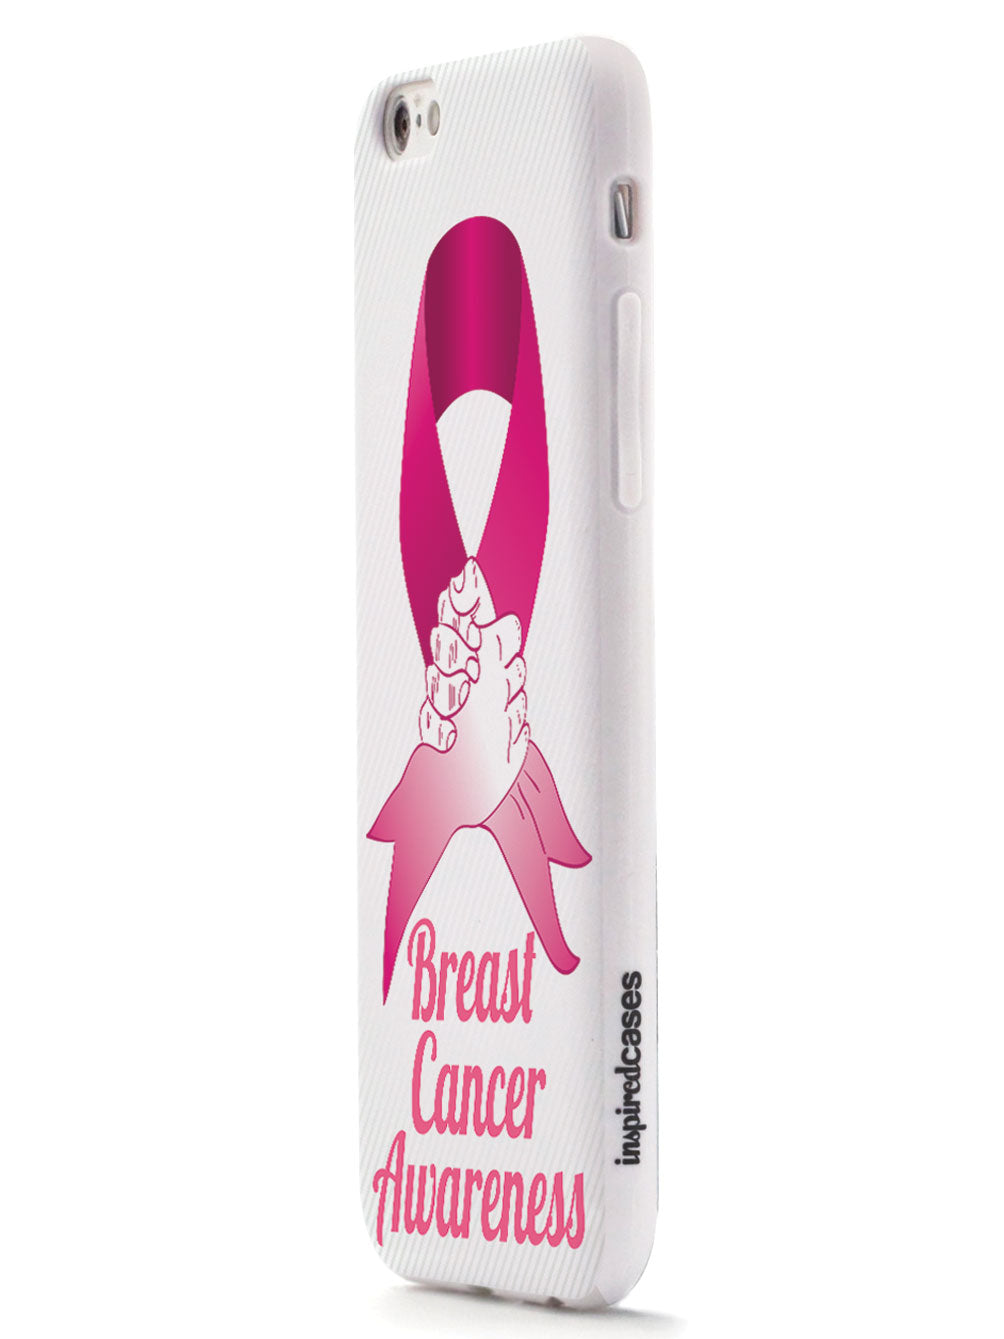 Pink Ribbon - Supporting Hand - Breast Cancer Awareness - White Case